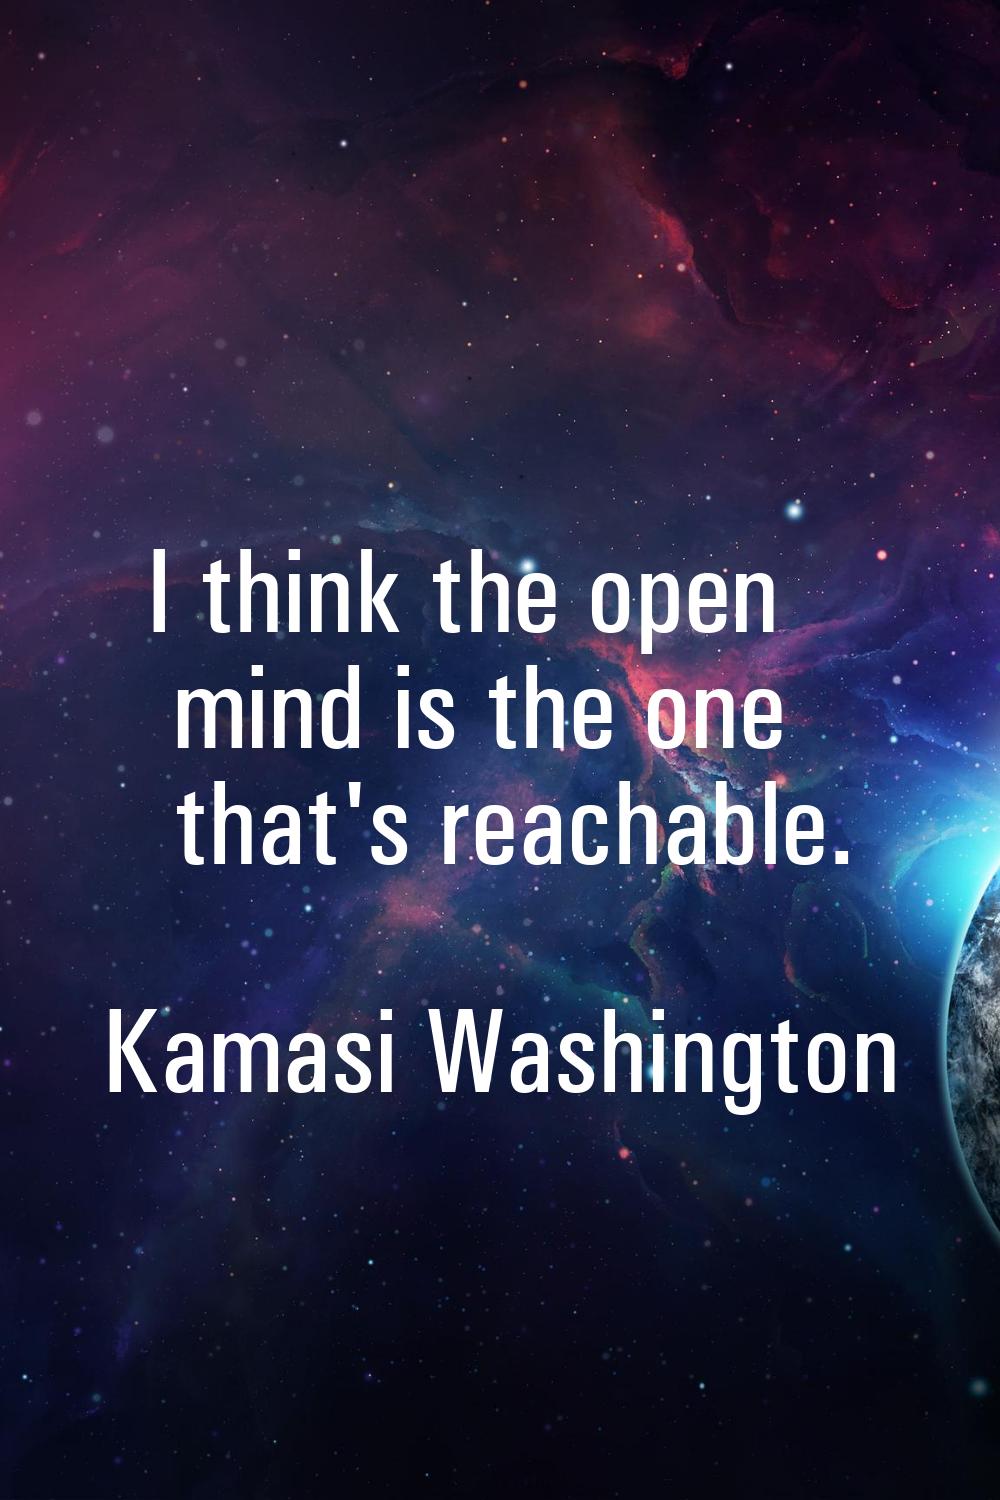 I think the open mind is the one that's reachable.